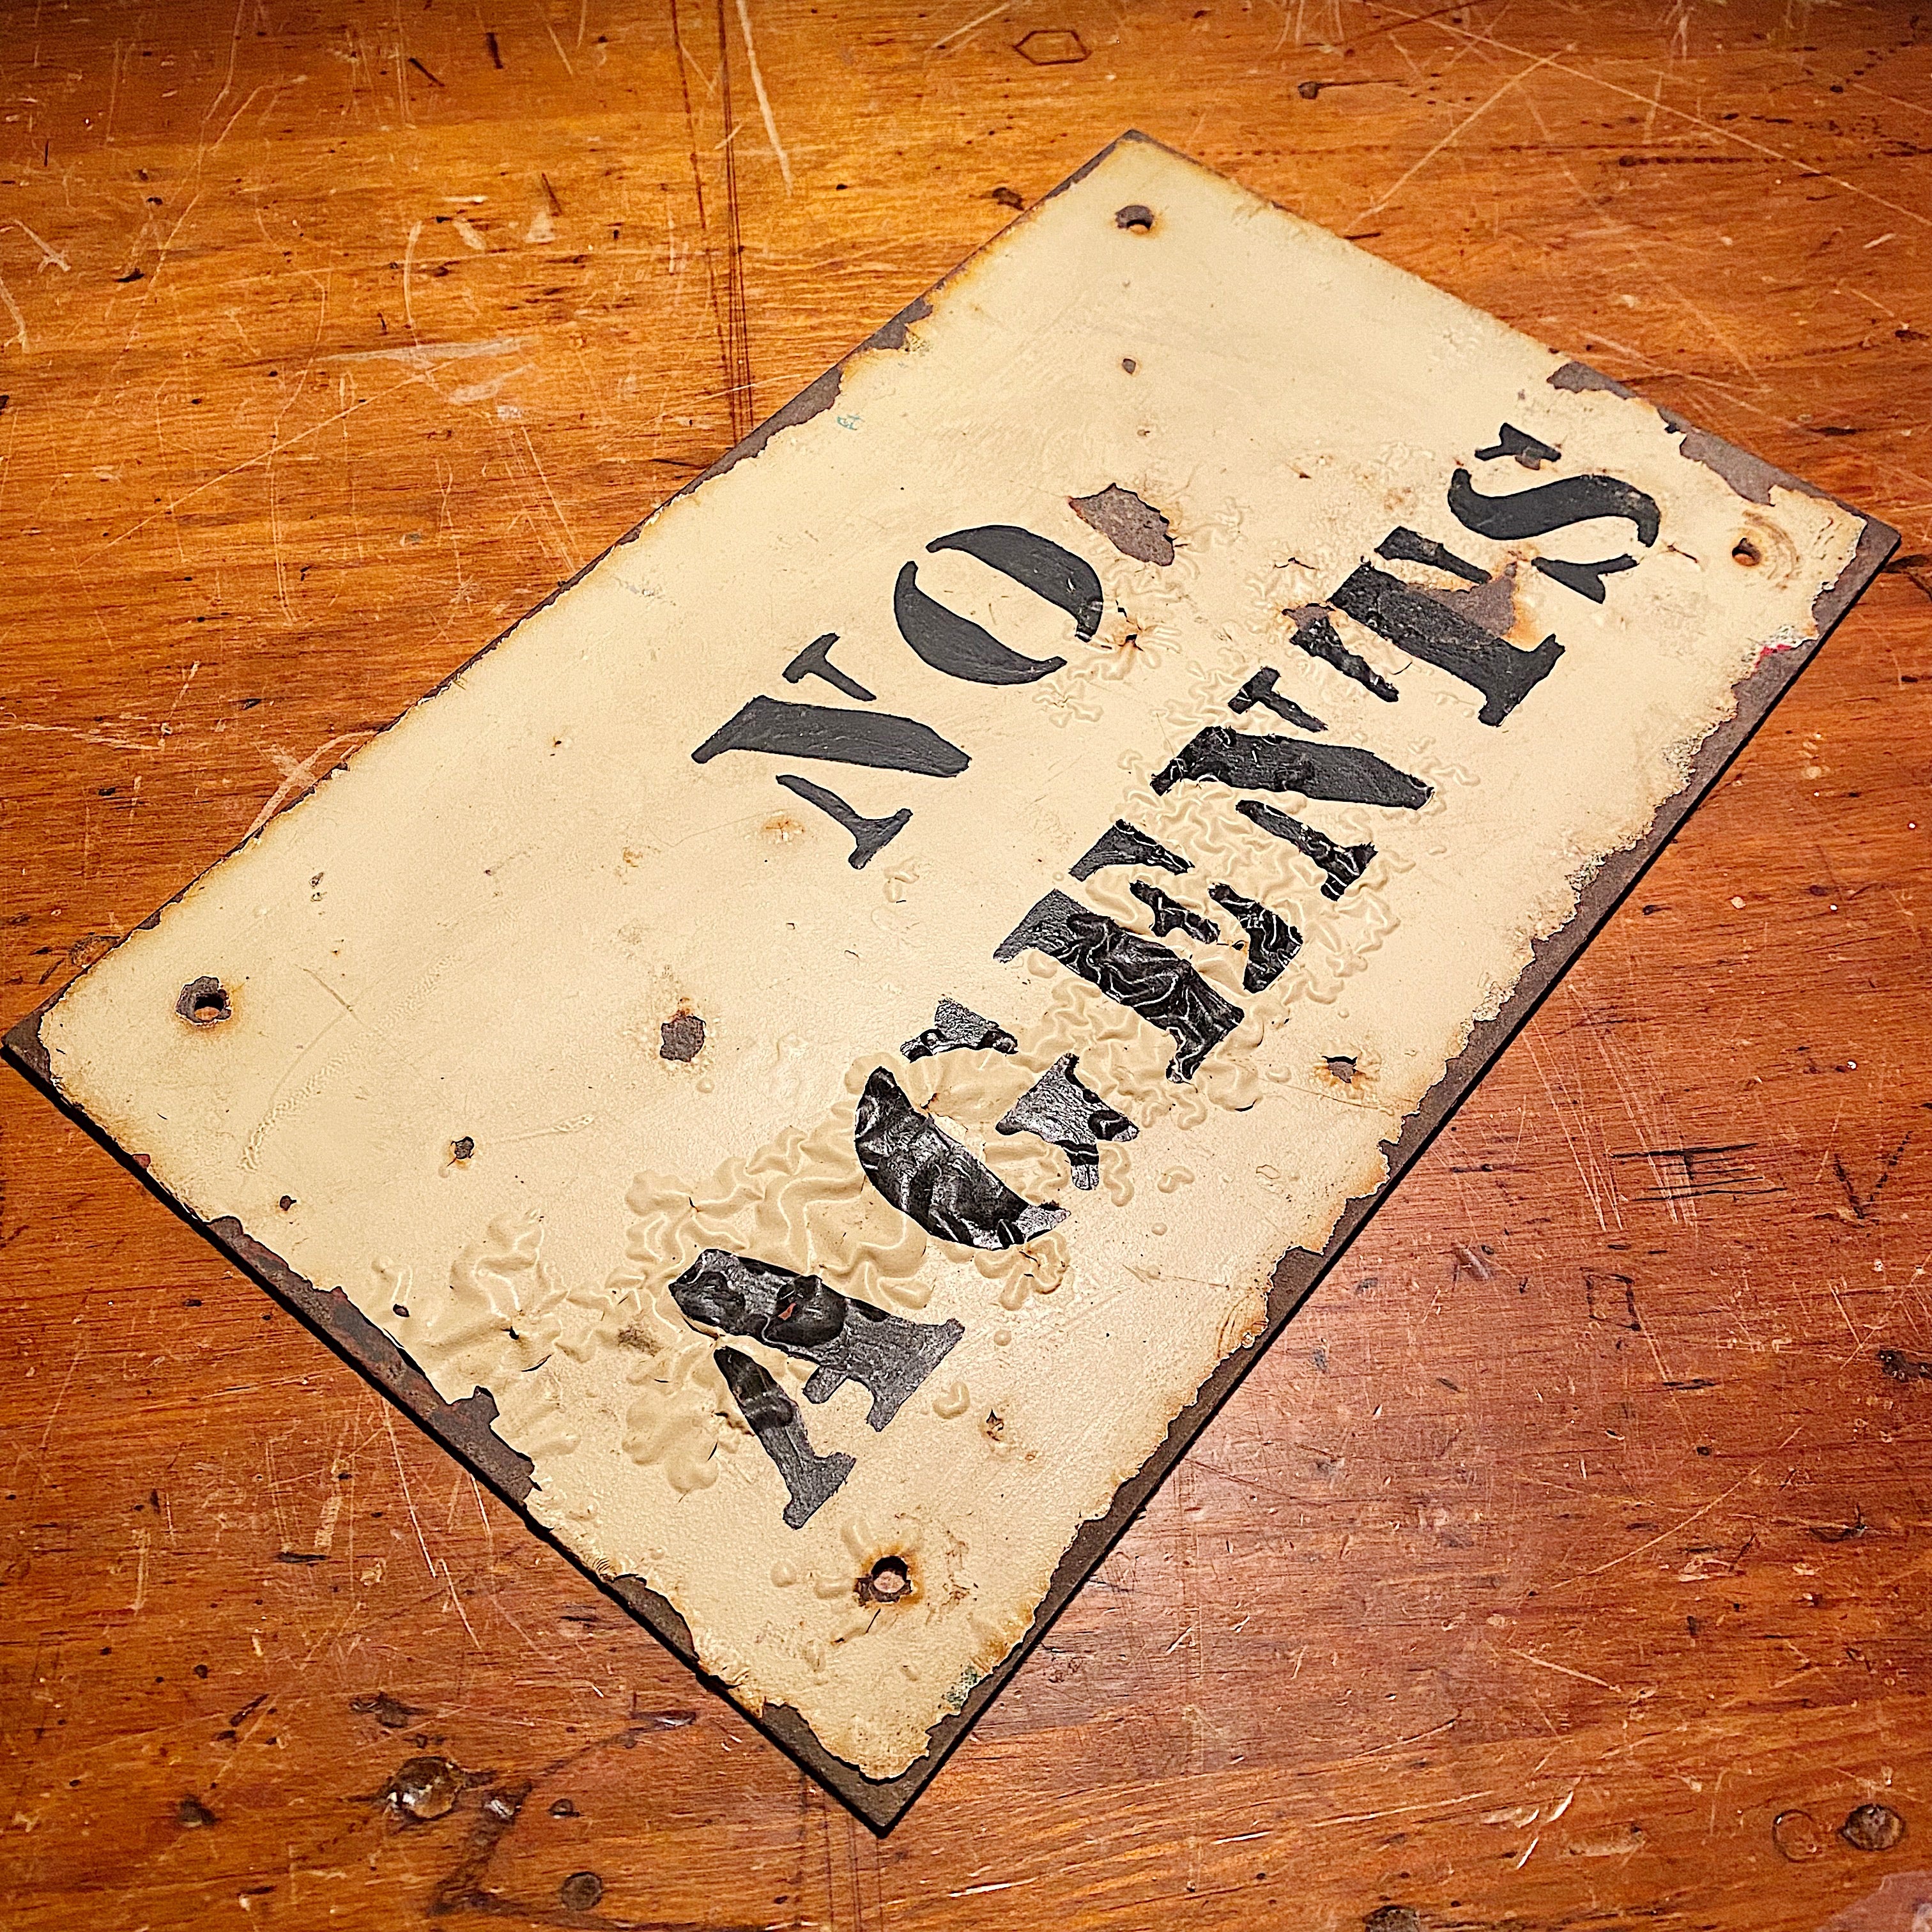 Vintage No Agents Metal Sign with Cool Patina - 1940s Anti-Salesman Stencil Signs - No Trespassing - Get Out - Rare Man Cave Decor